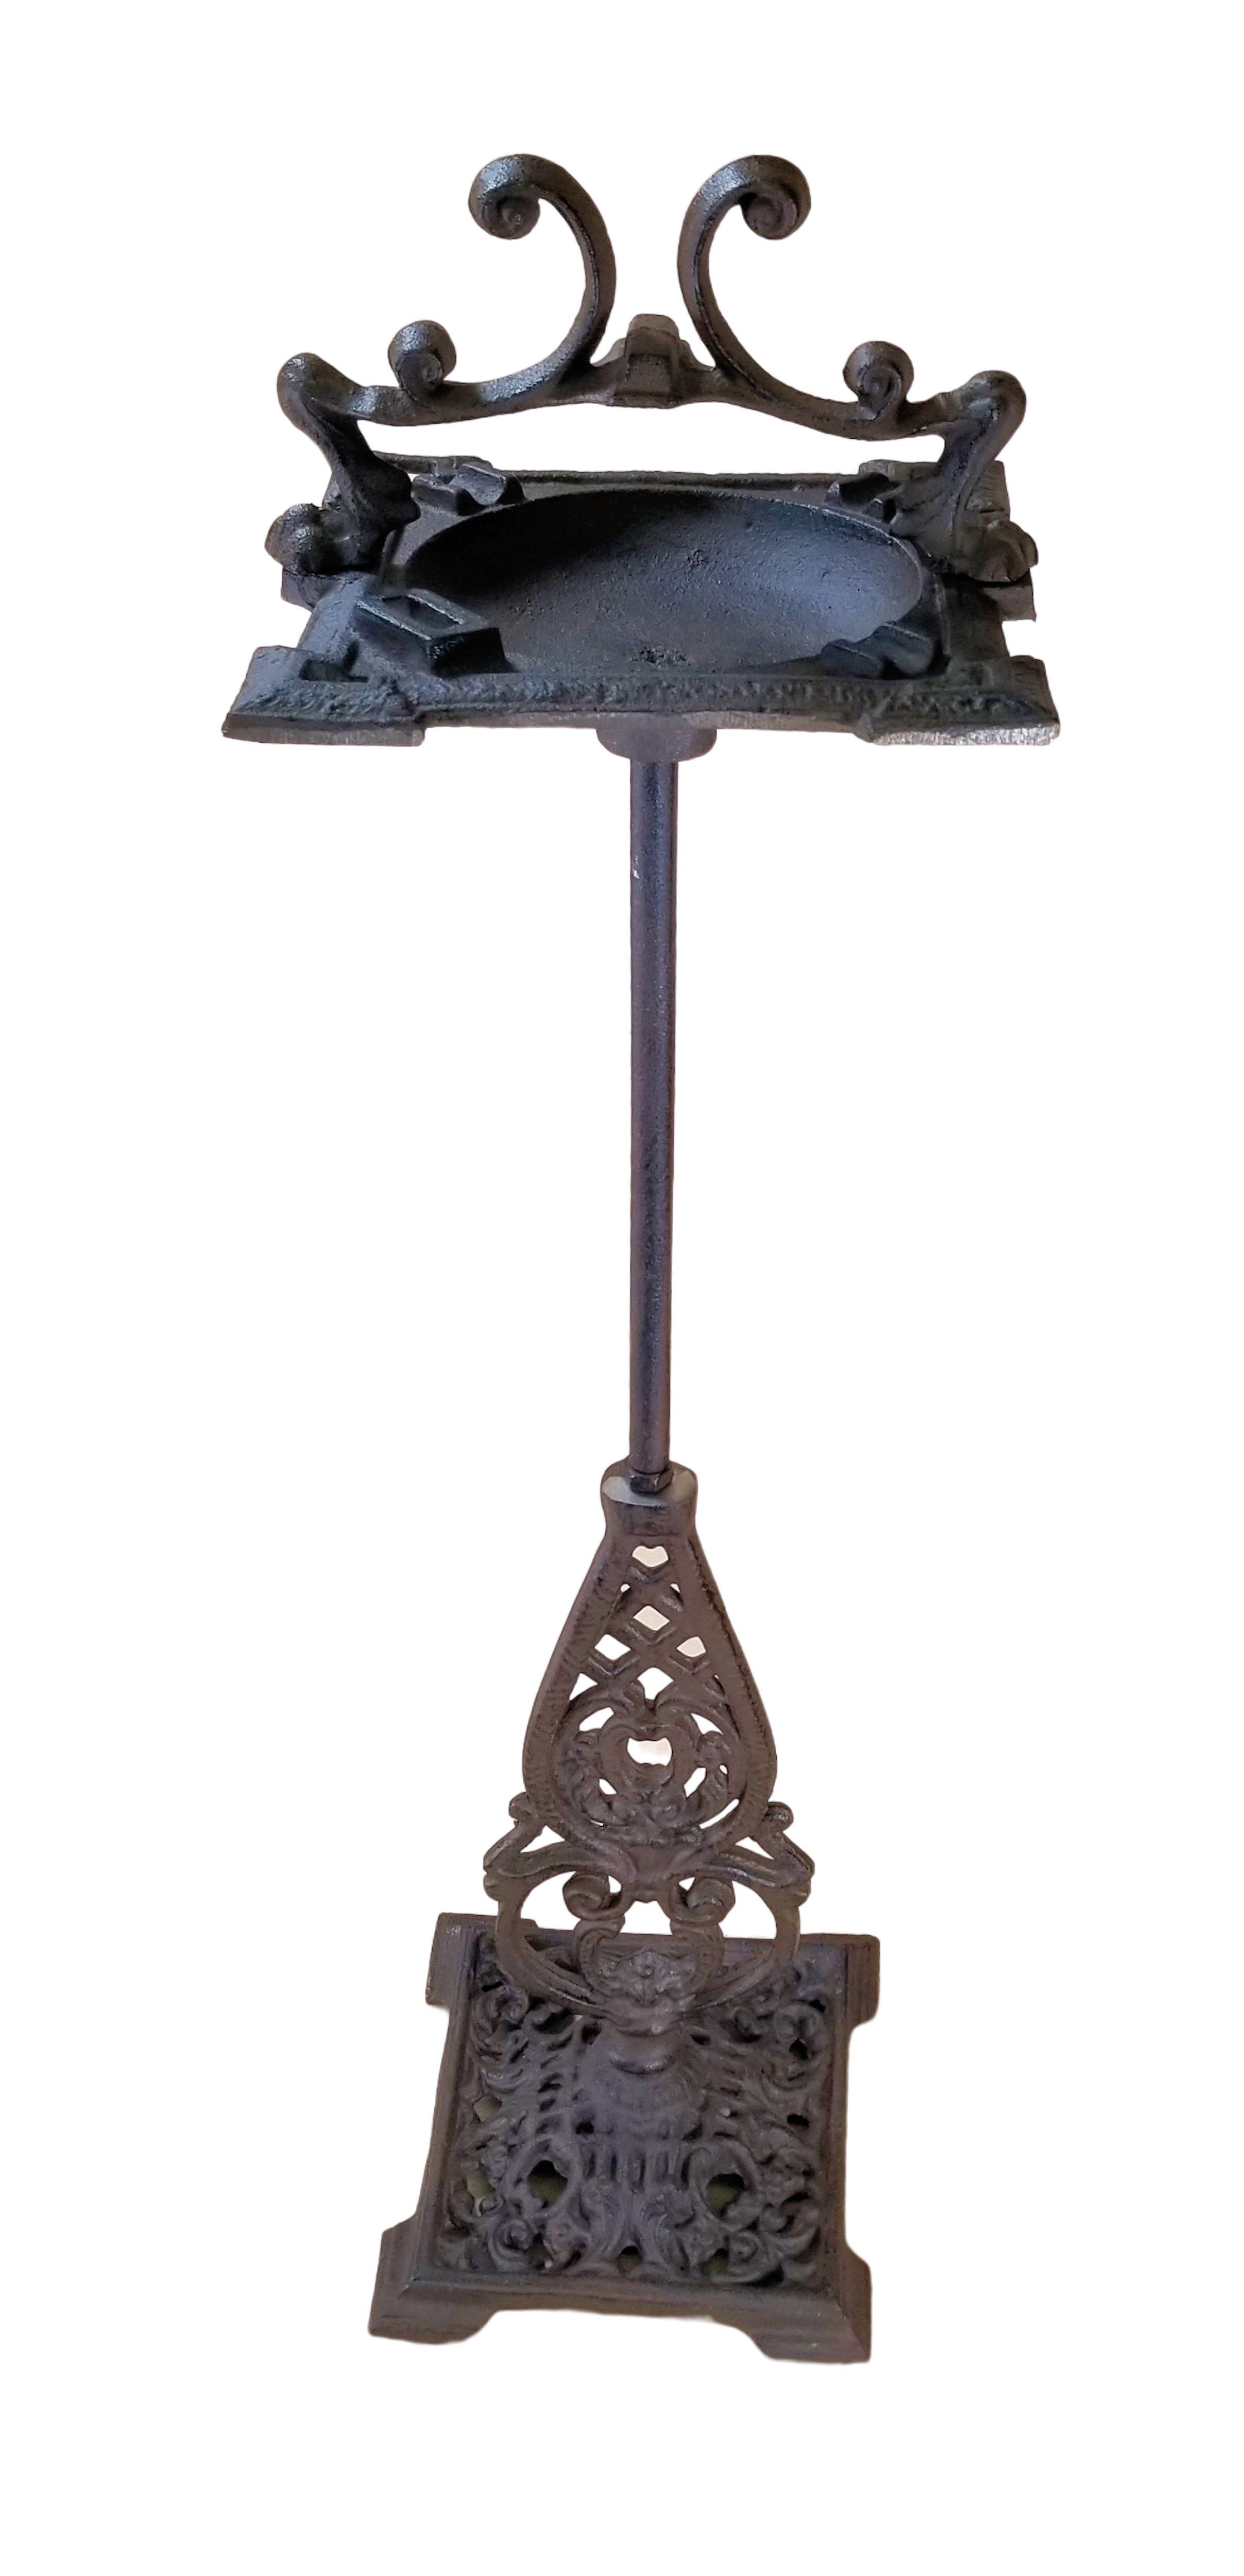 Art Deco Heavy Cast Iron Ashtray Stand w/Handle for Cigars and Cigarettes Outdoors, Brown